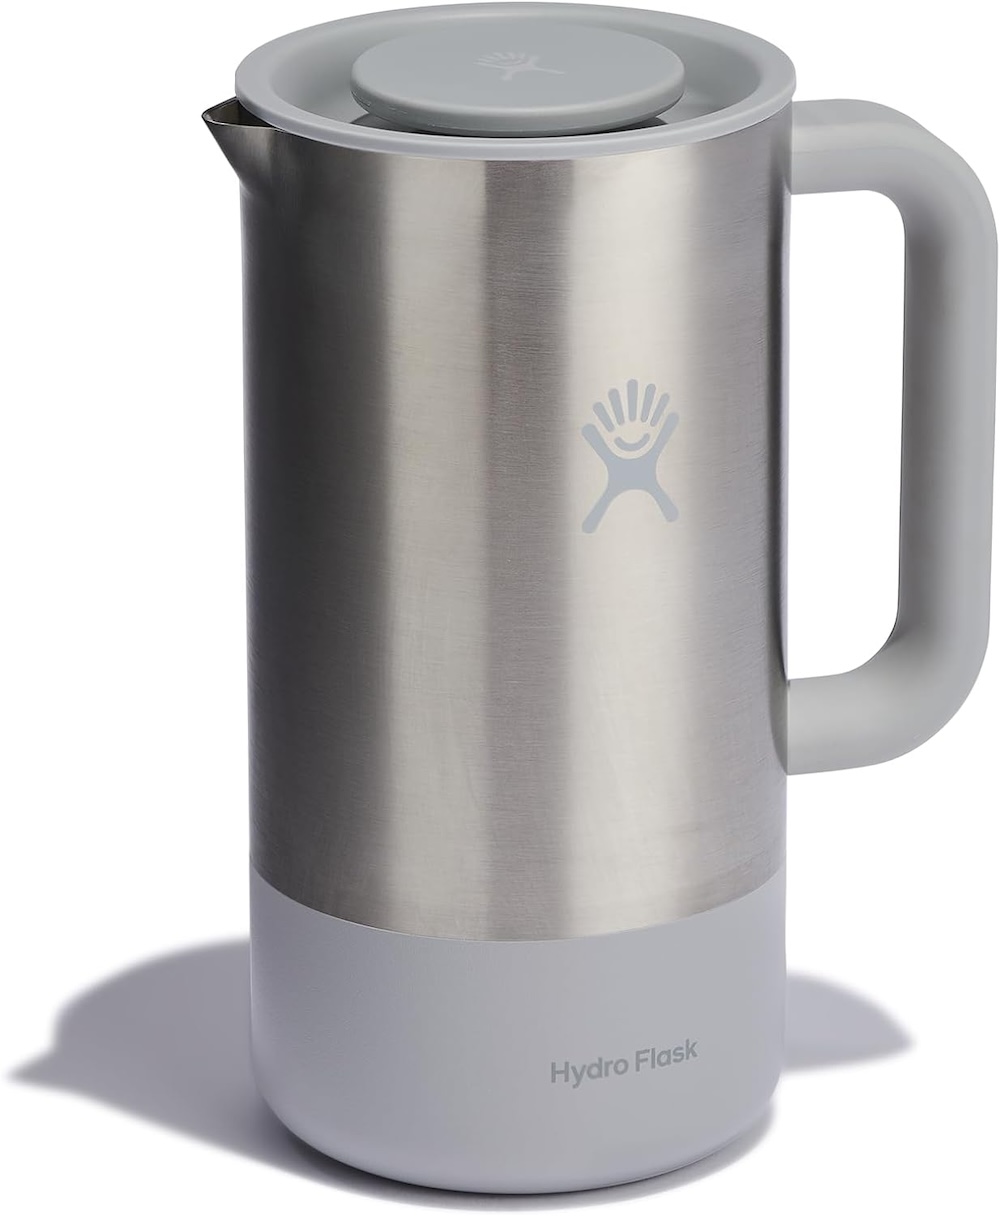 A Hydro Flask French press